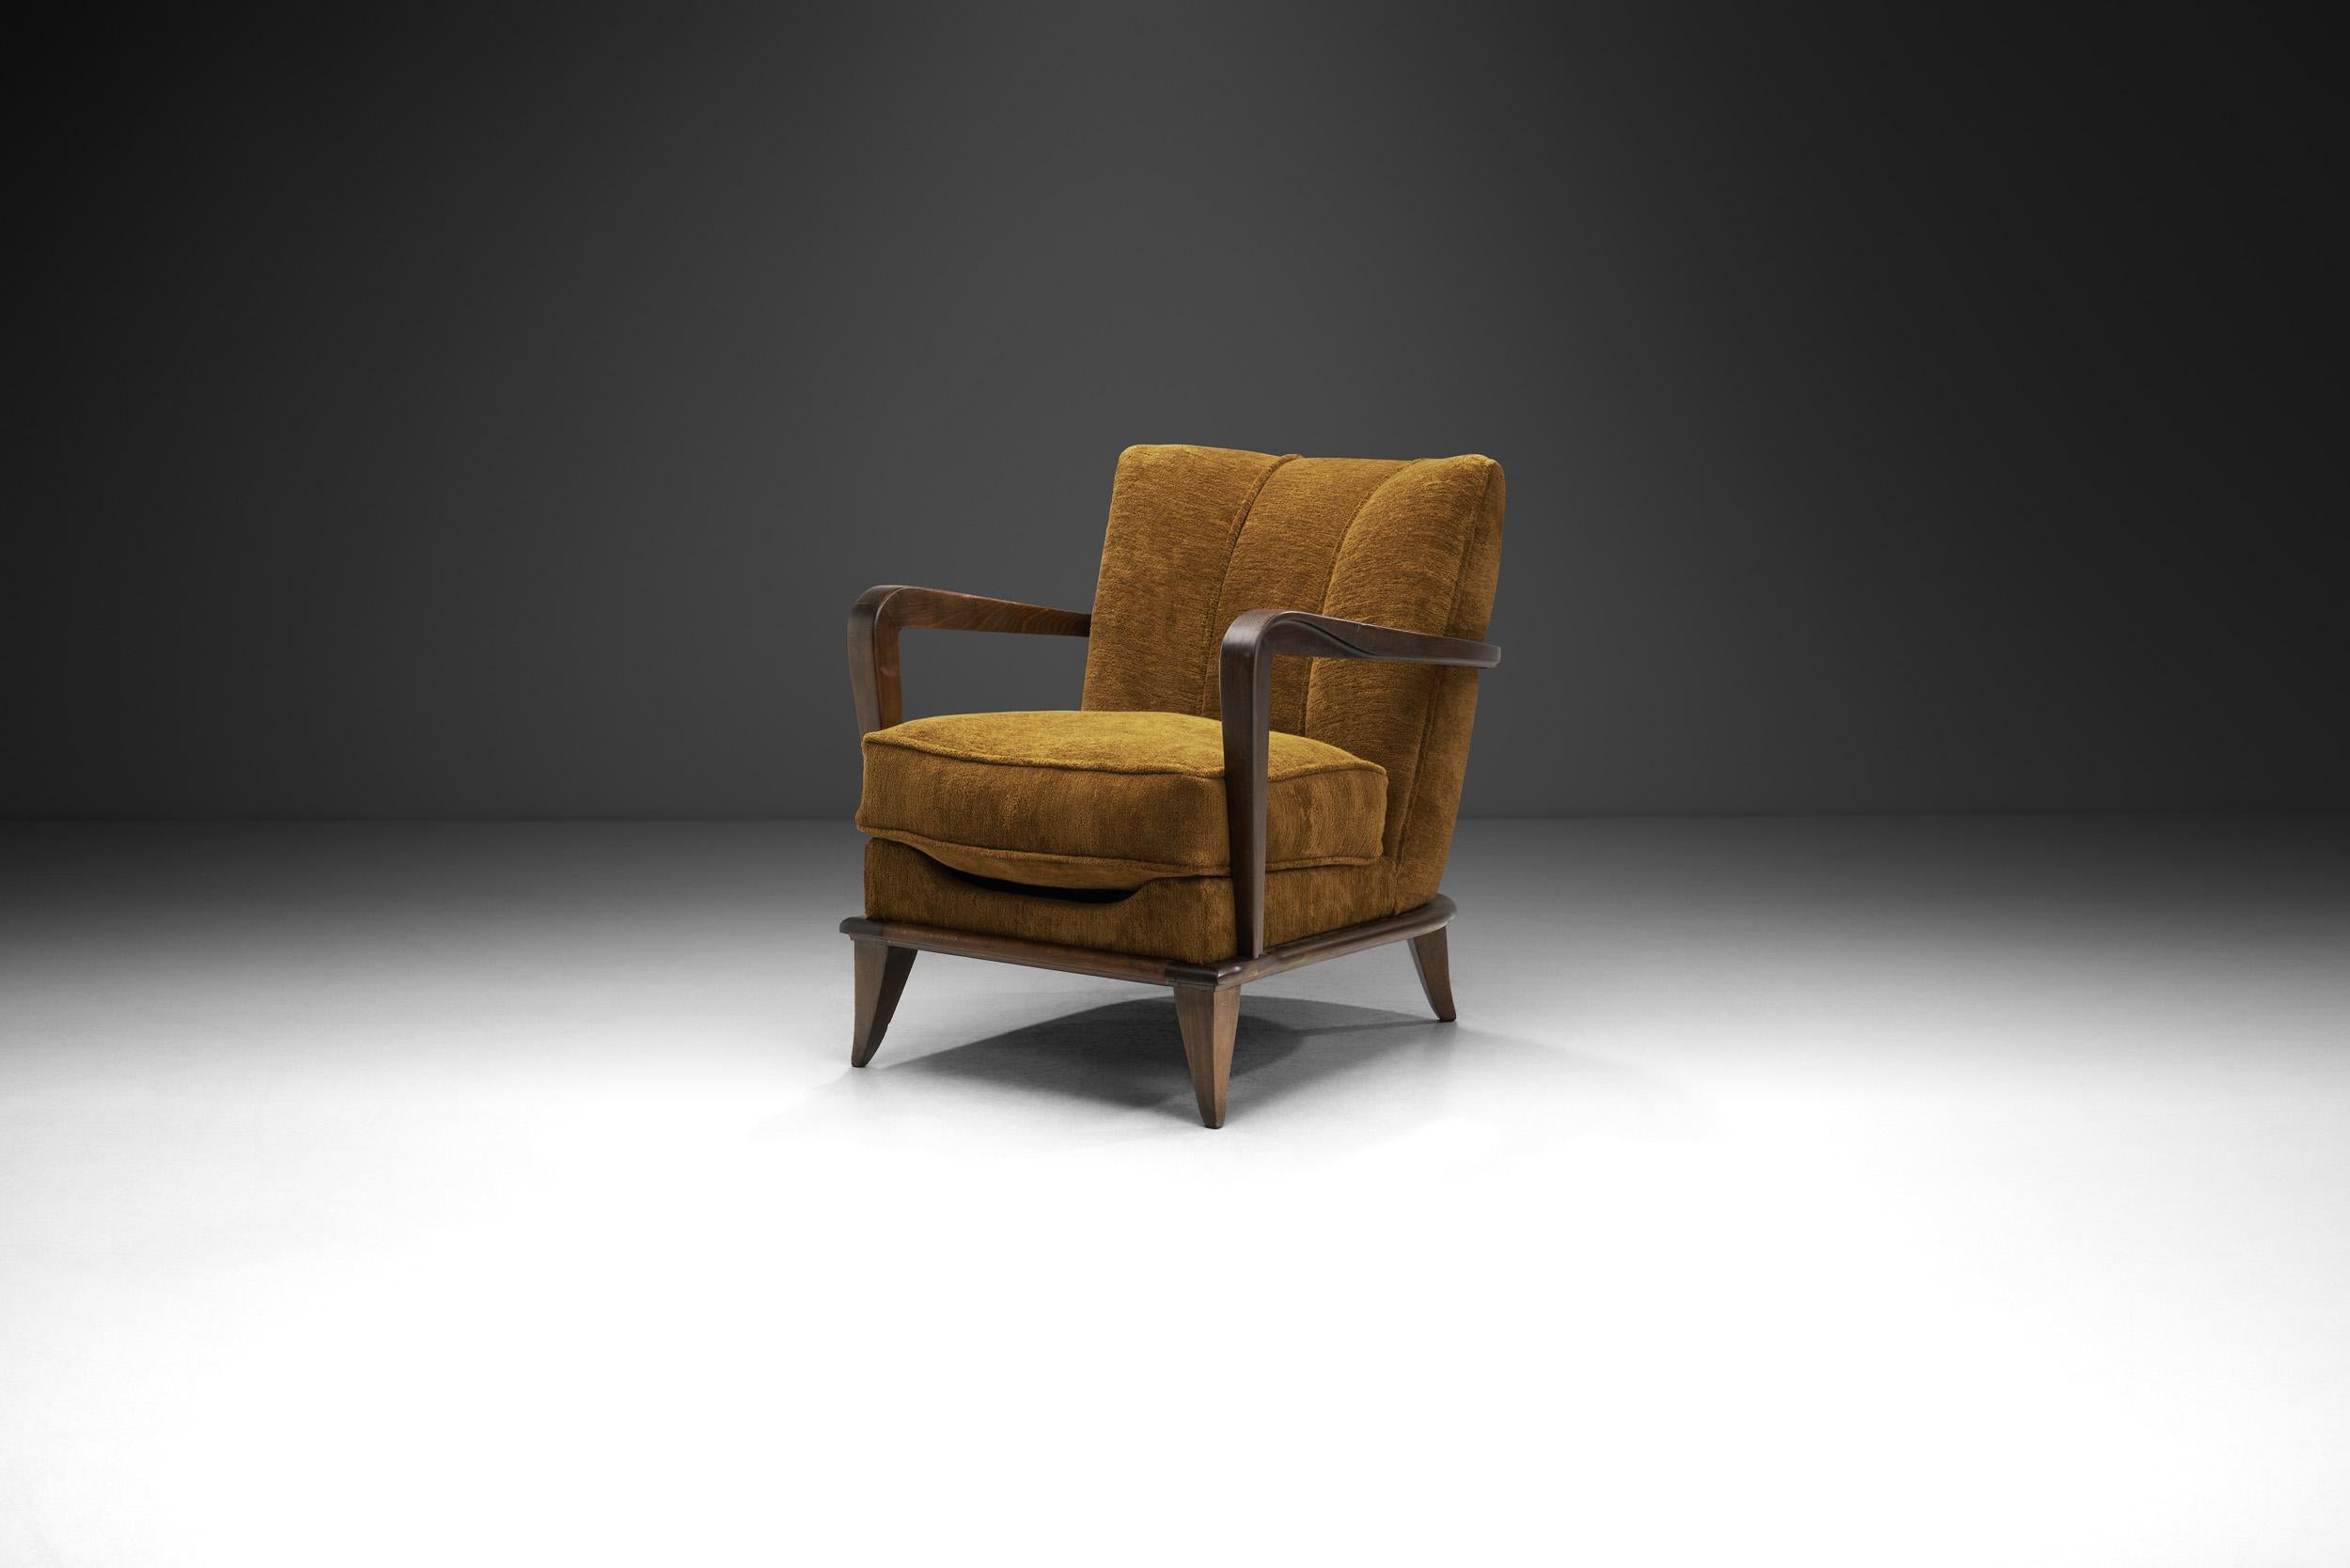 Etienne-Henri Martin’s design work combined elements of classic and avant-garde French design. The French designer and decorator designed his most famous seating models in the early 1950s, symbolizing French modernism of the 20th